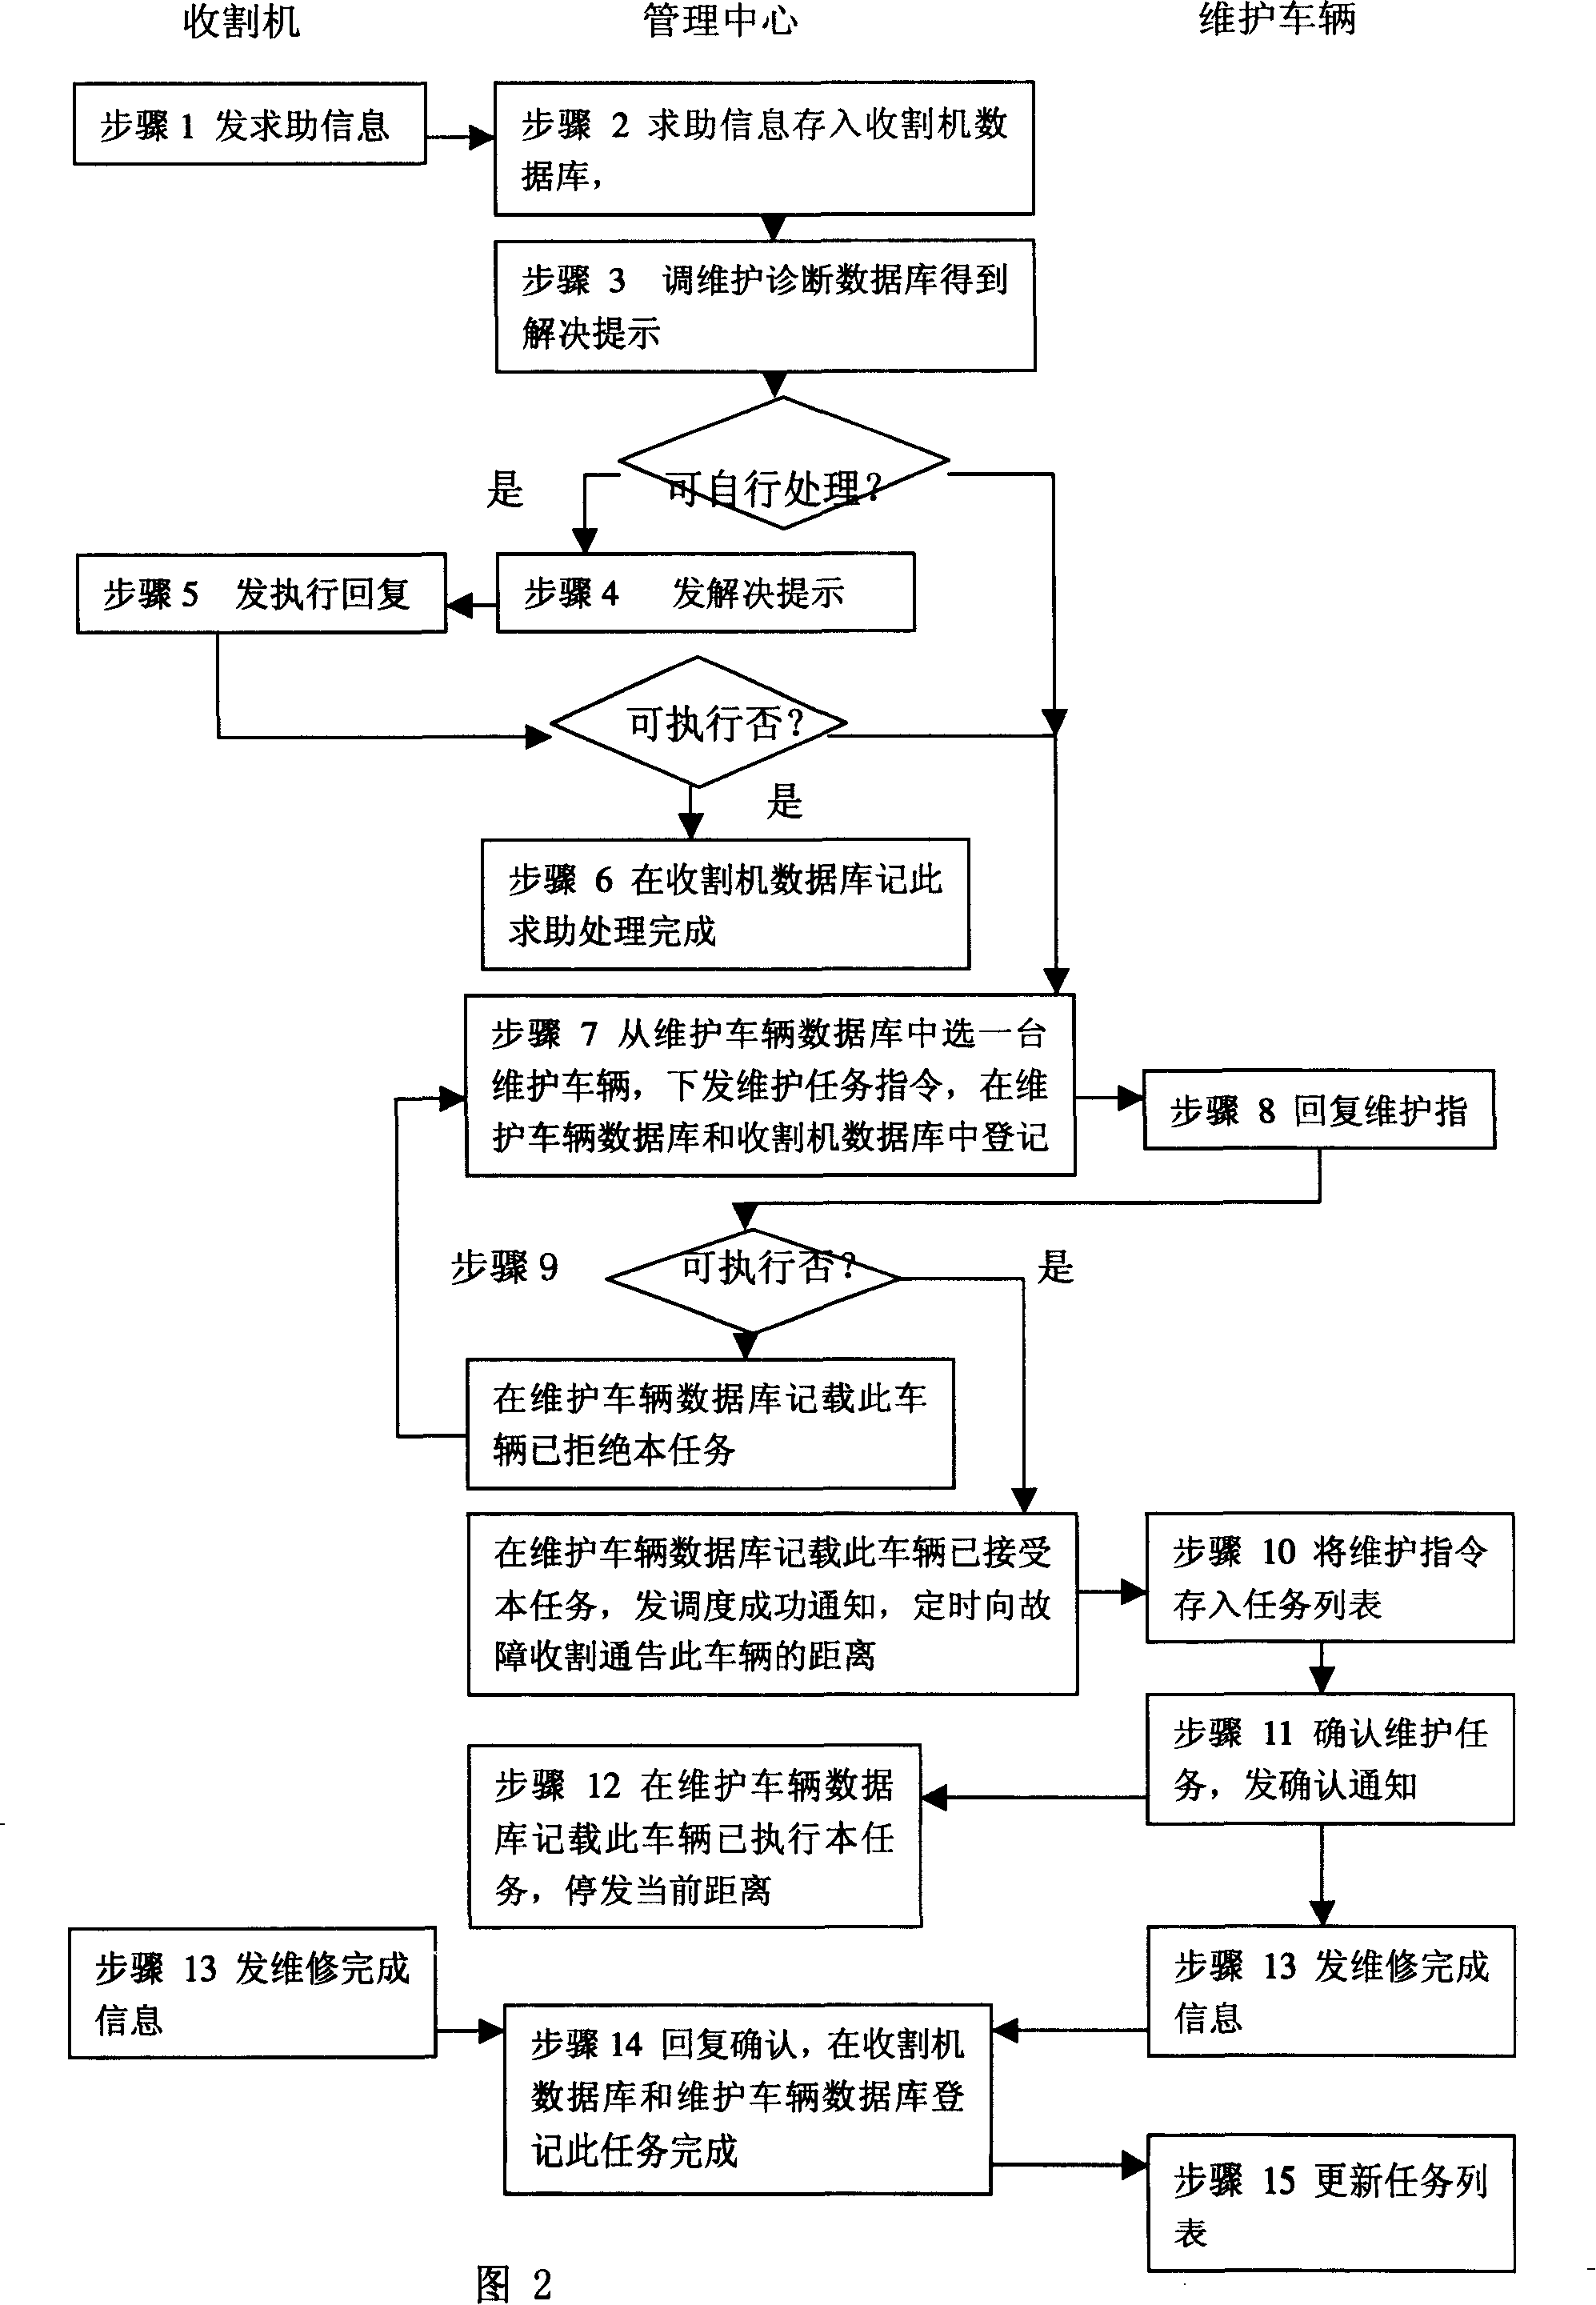 Method for remote detecting and maintaining information exchange of agricultural machine